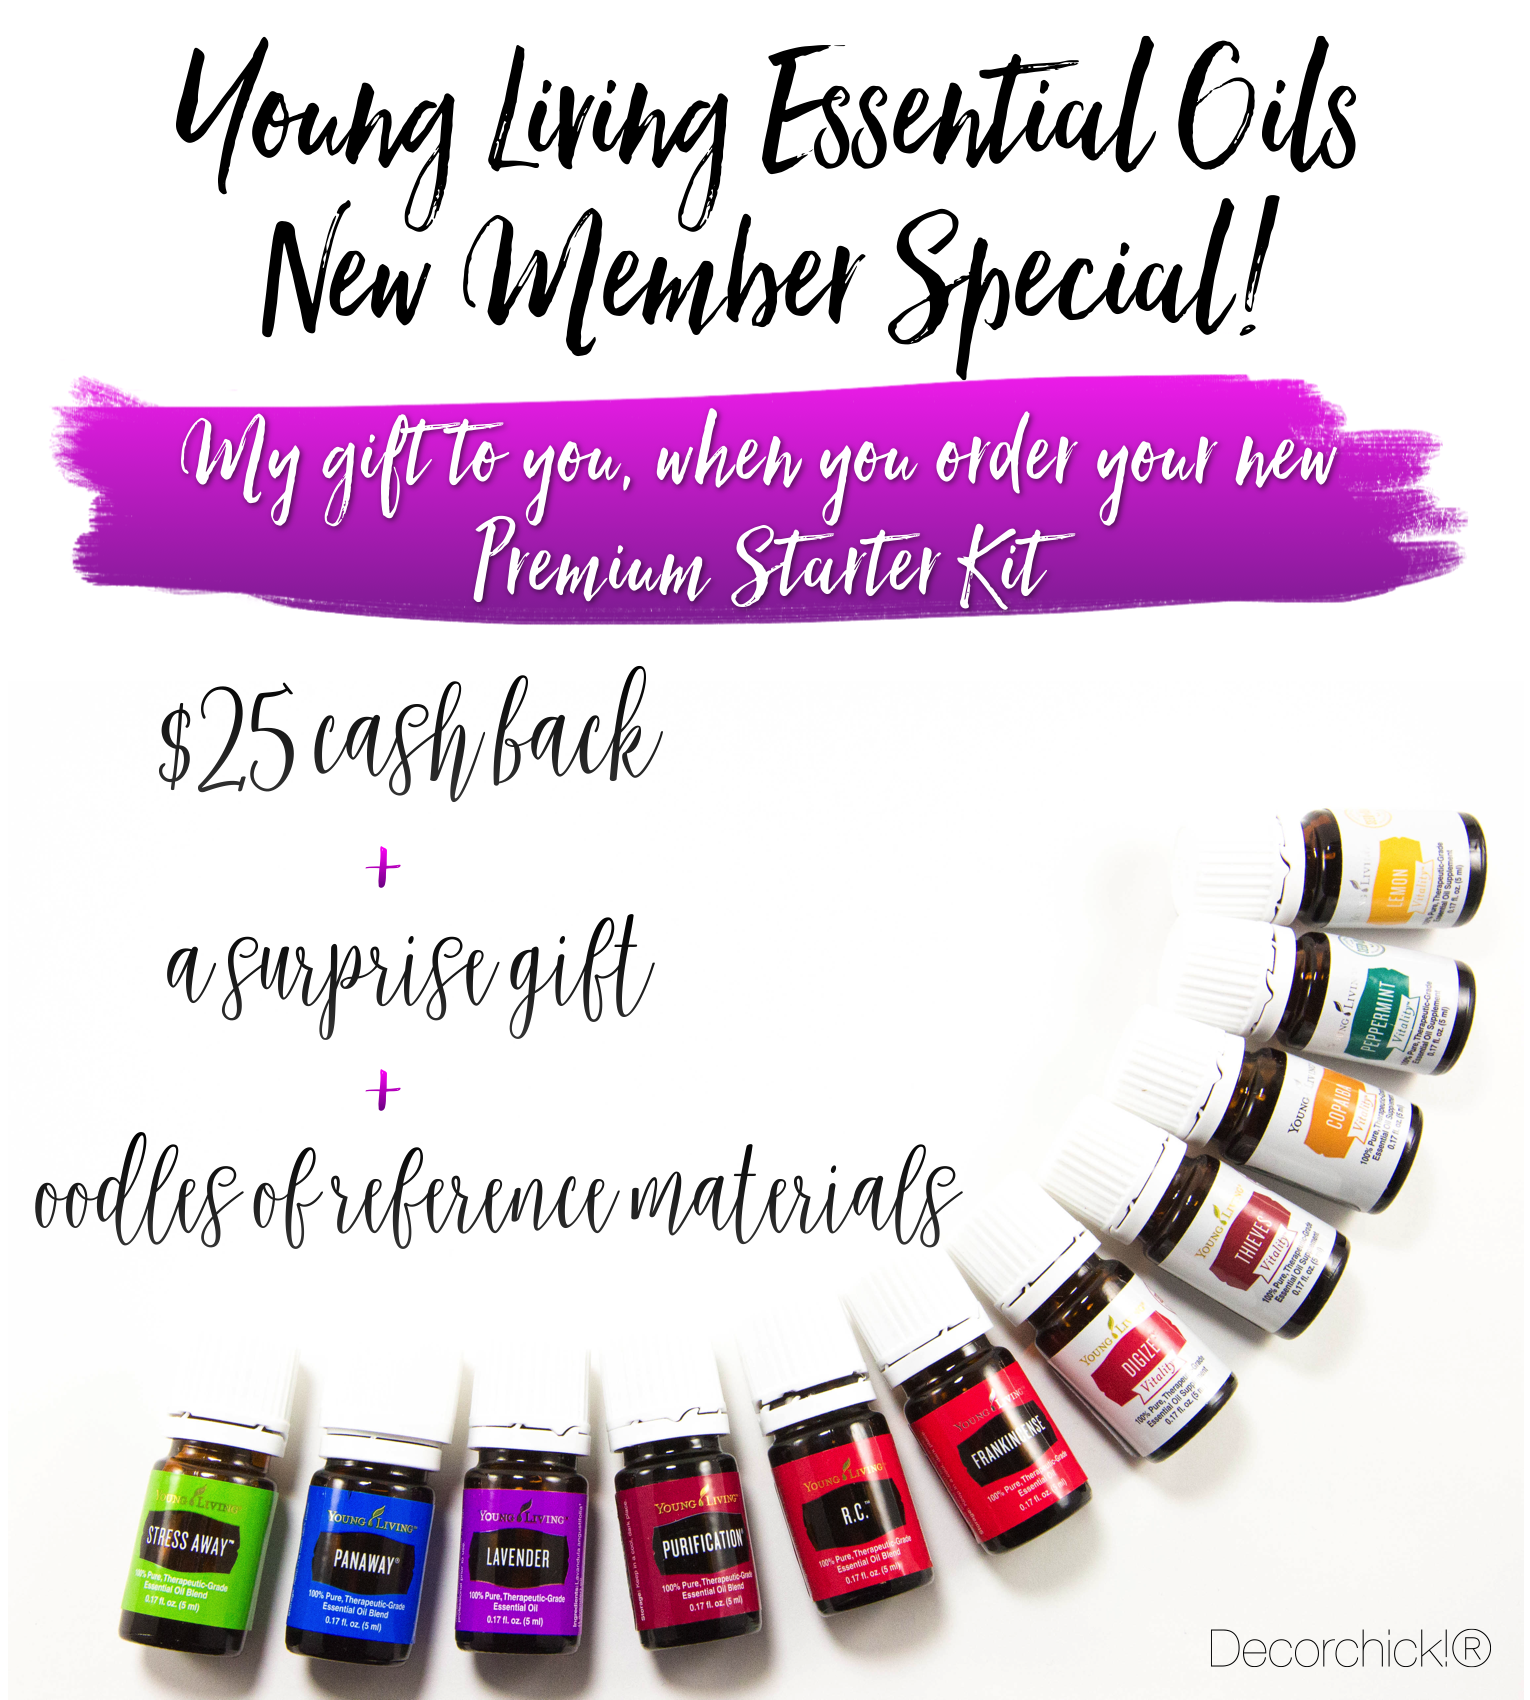 Young Living Special for New Members! Only on Decorchick.com | Decorchick!®